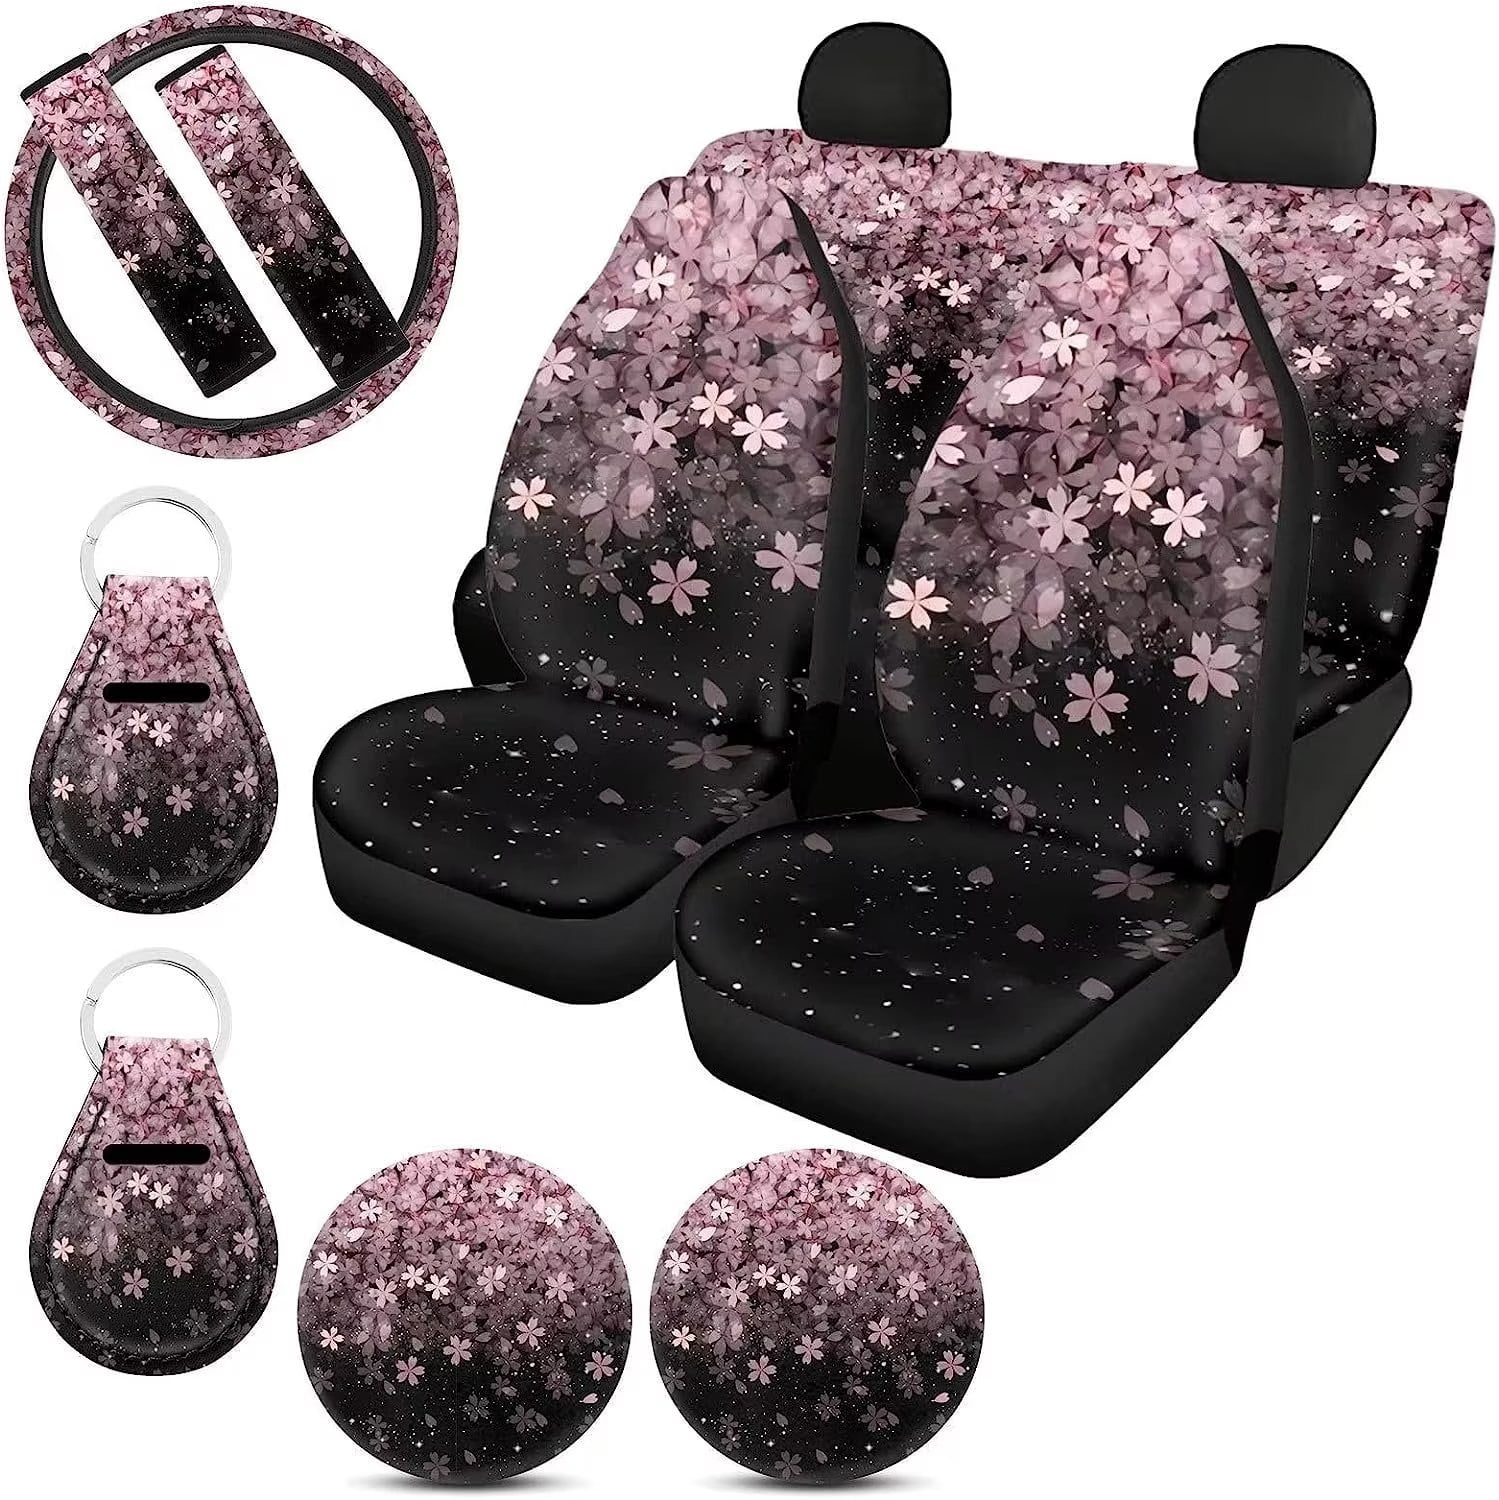 Pzuqiu Strawberry Seat Covers for Cars Pink Car Accessories for Women Cute  Interior Set Polka Dots Steering Wheel Cover,Seat Belt Pads,Cup  Holder,Keychain Universal Strawberry Decor for Truck SUV 